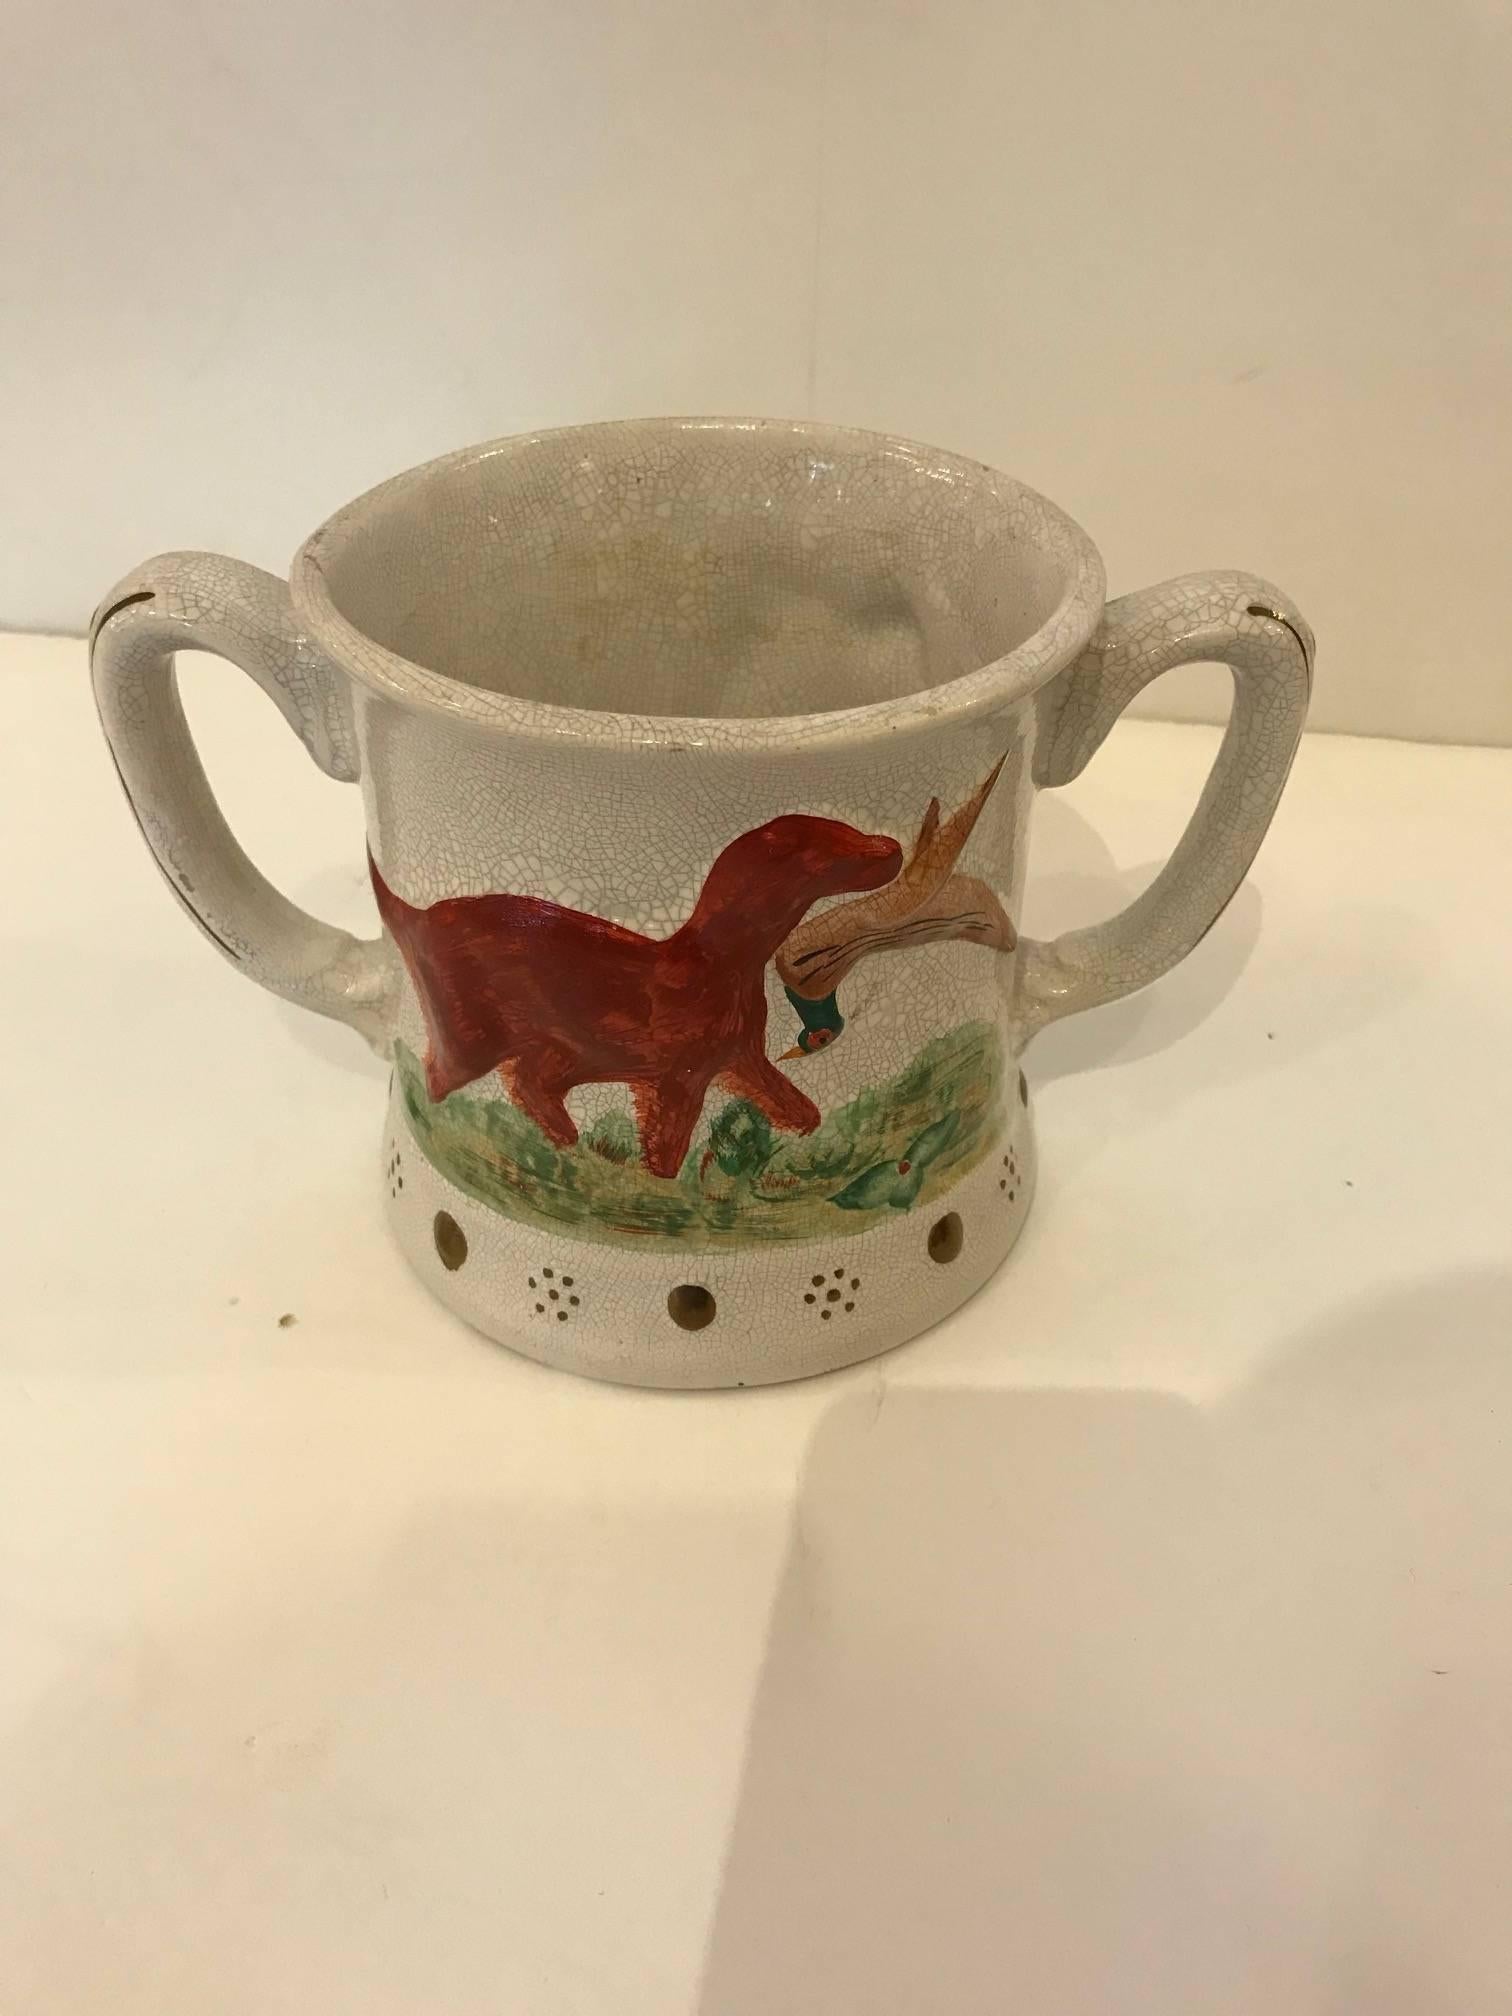 Darling antique Staffordshire mug hand-painted with animals on the outside with a fun whimsical frog on the inside.